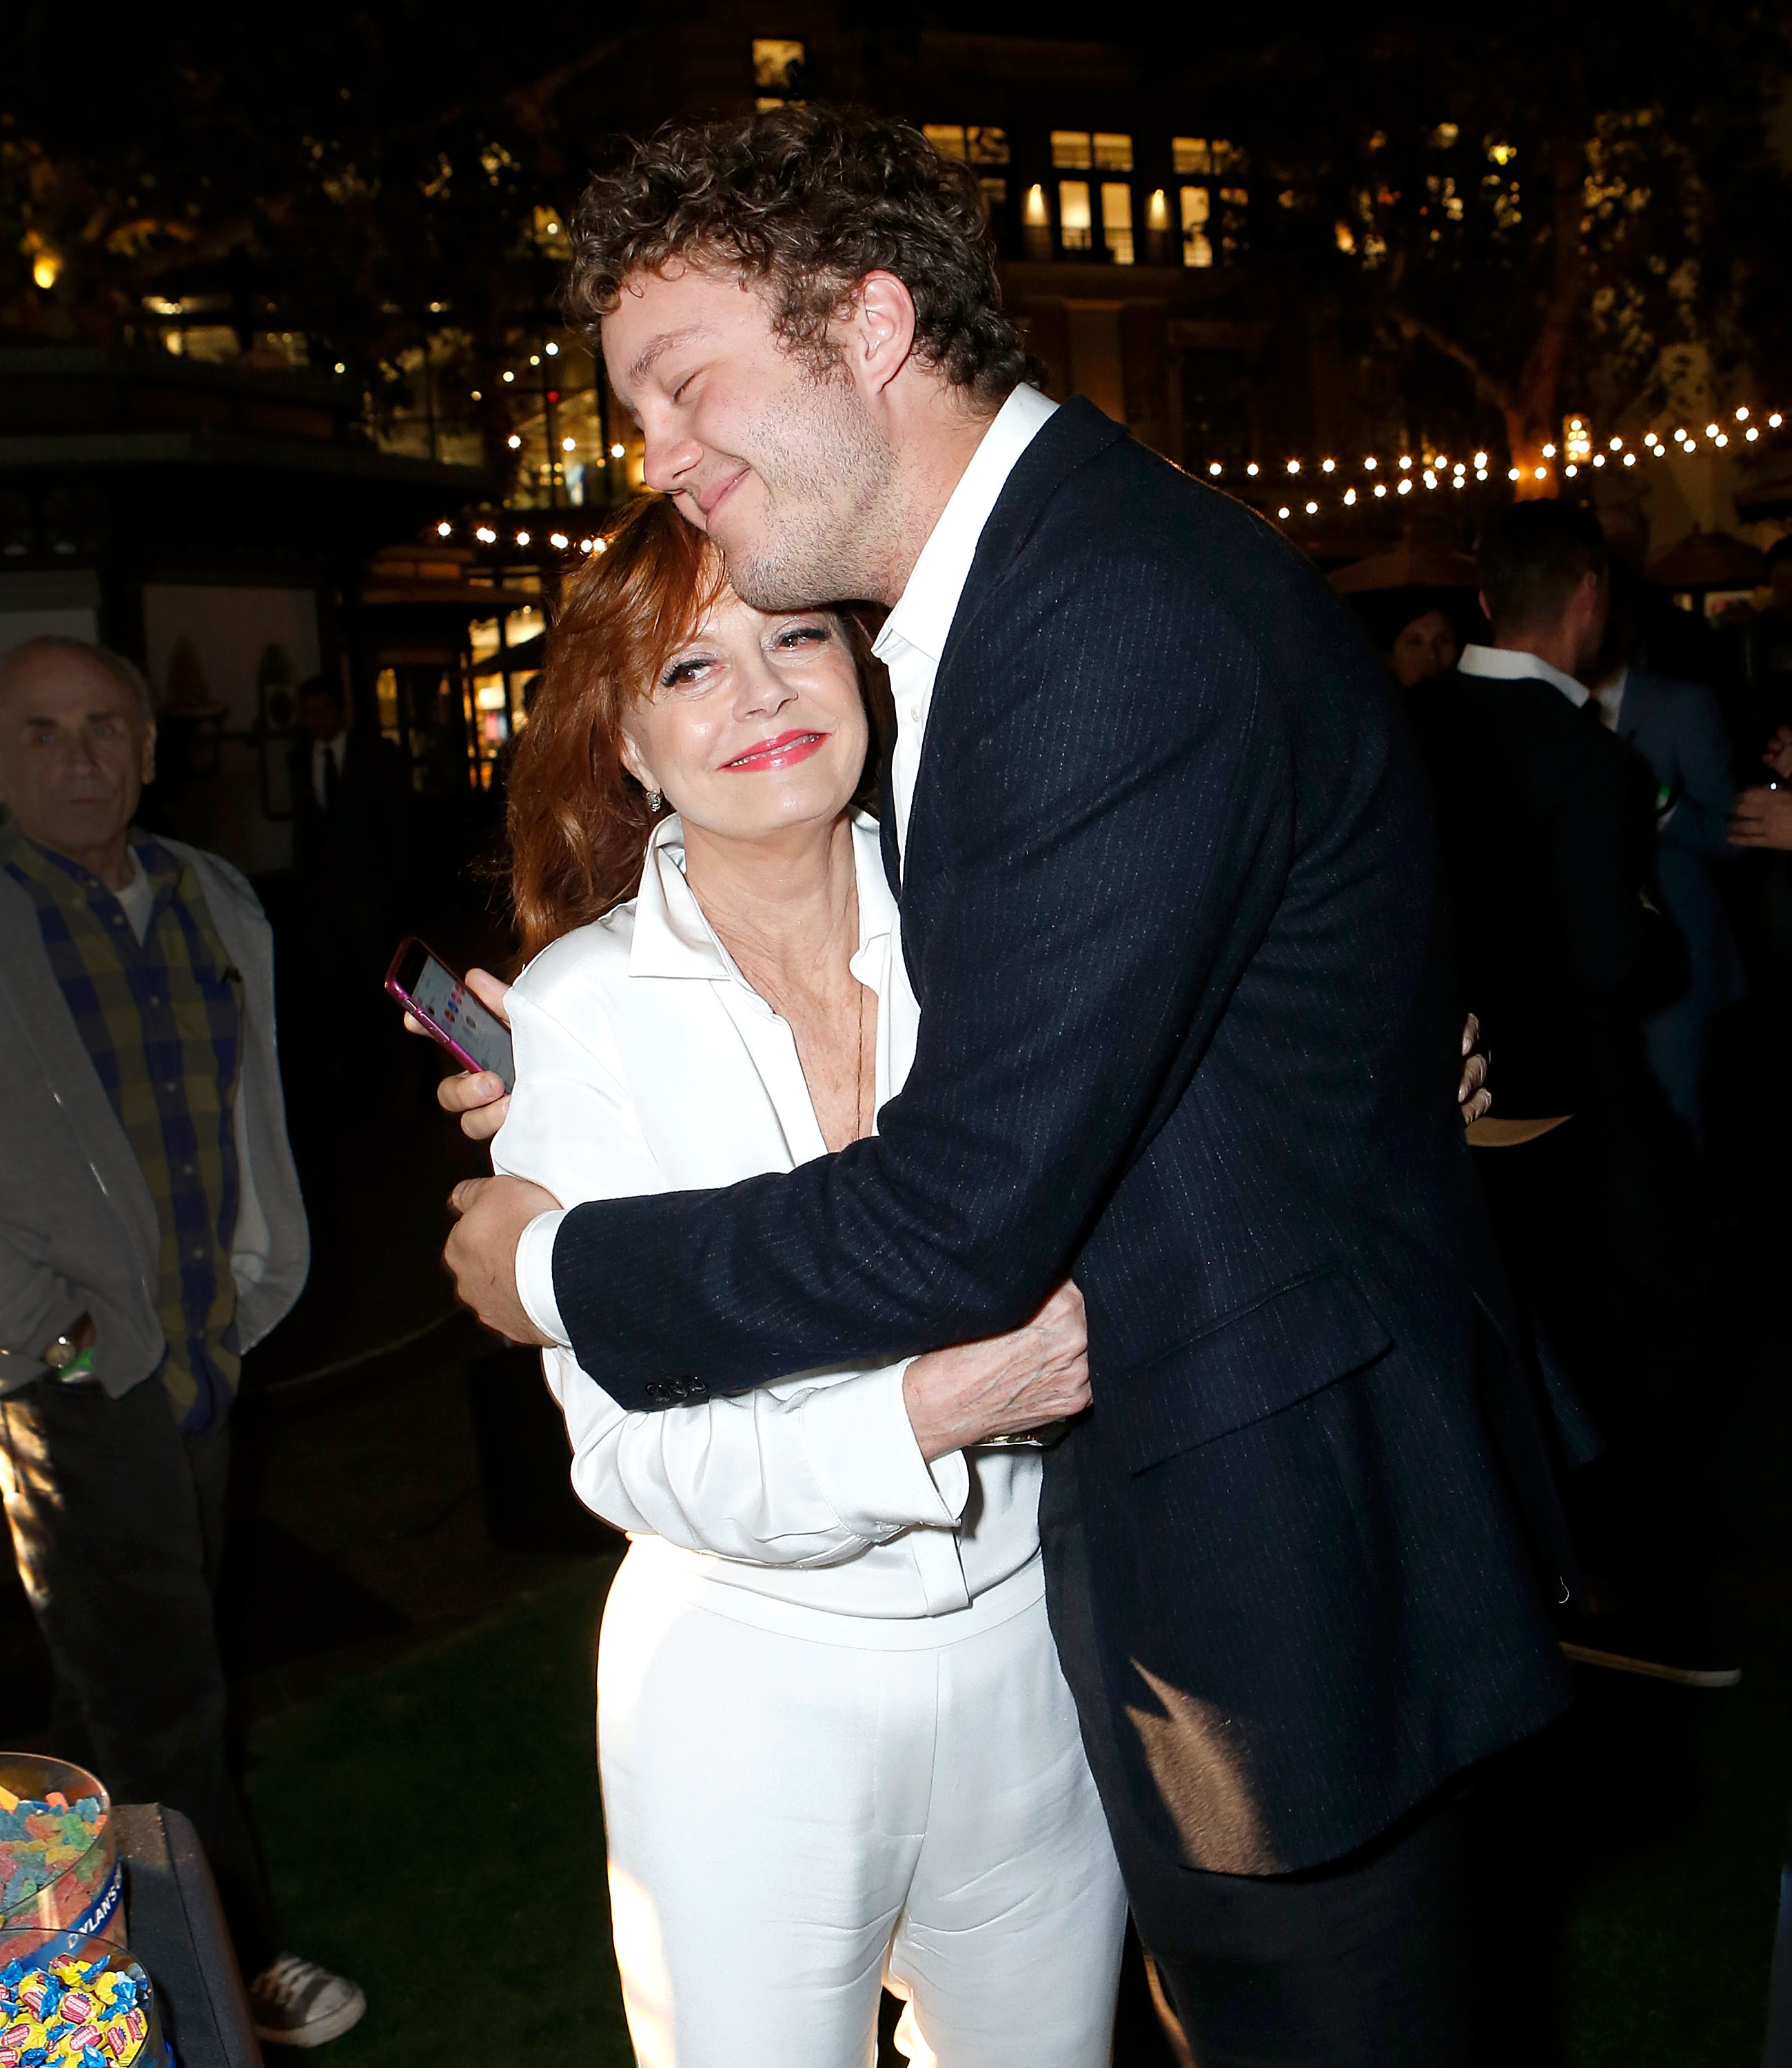 Susan Sarandon and Jack Henry Robbins at the after party of "The Meddler" in Los Angeles, California on April 13, 2016 | Source: Getty Images